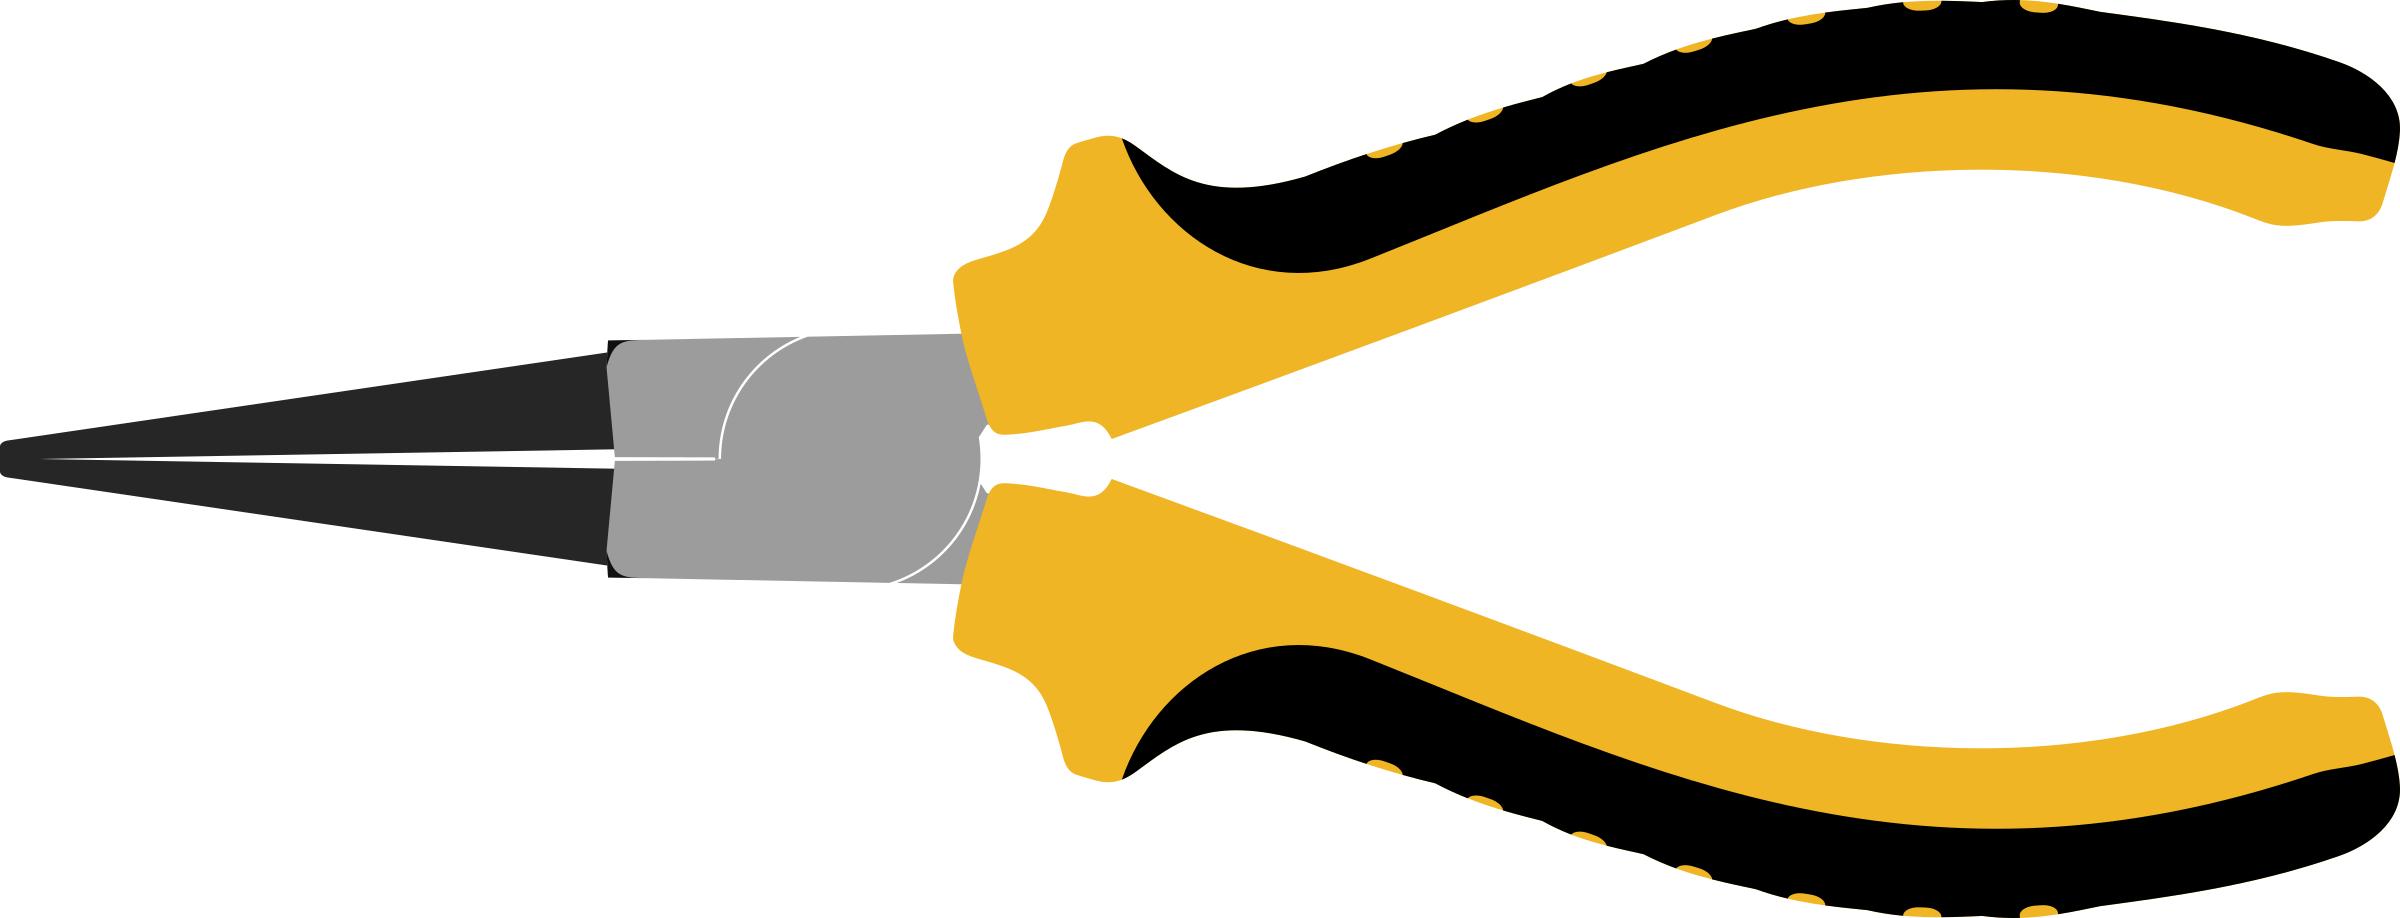 Round-nose pliers png